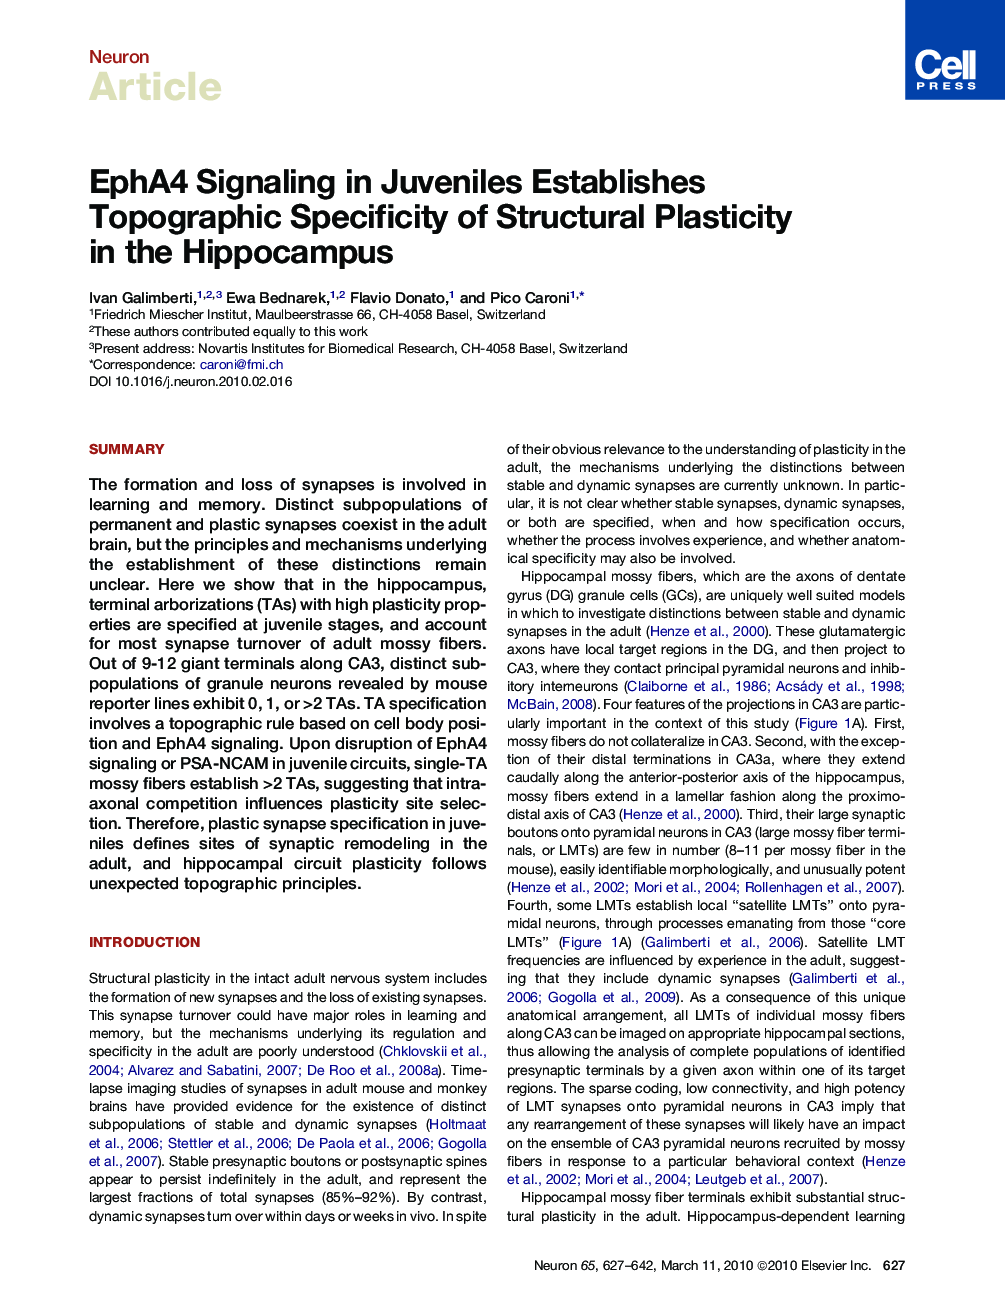 EphA4 Signaling in Juveniles Establishes Topographic Specificity of Structural Plasticity in the Hippocampus